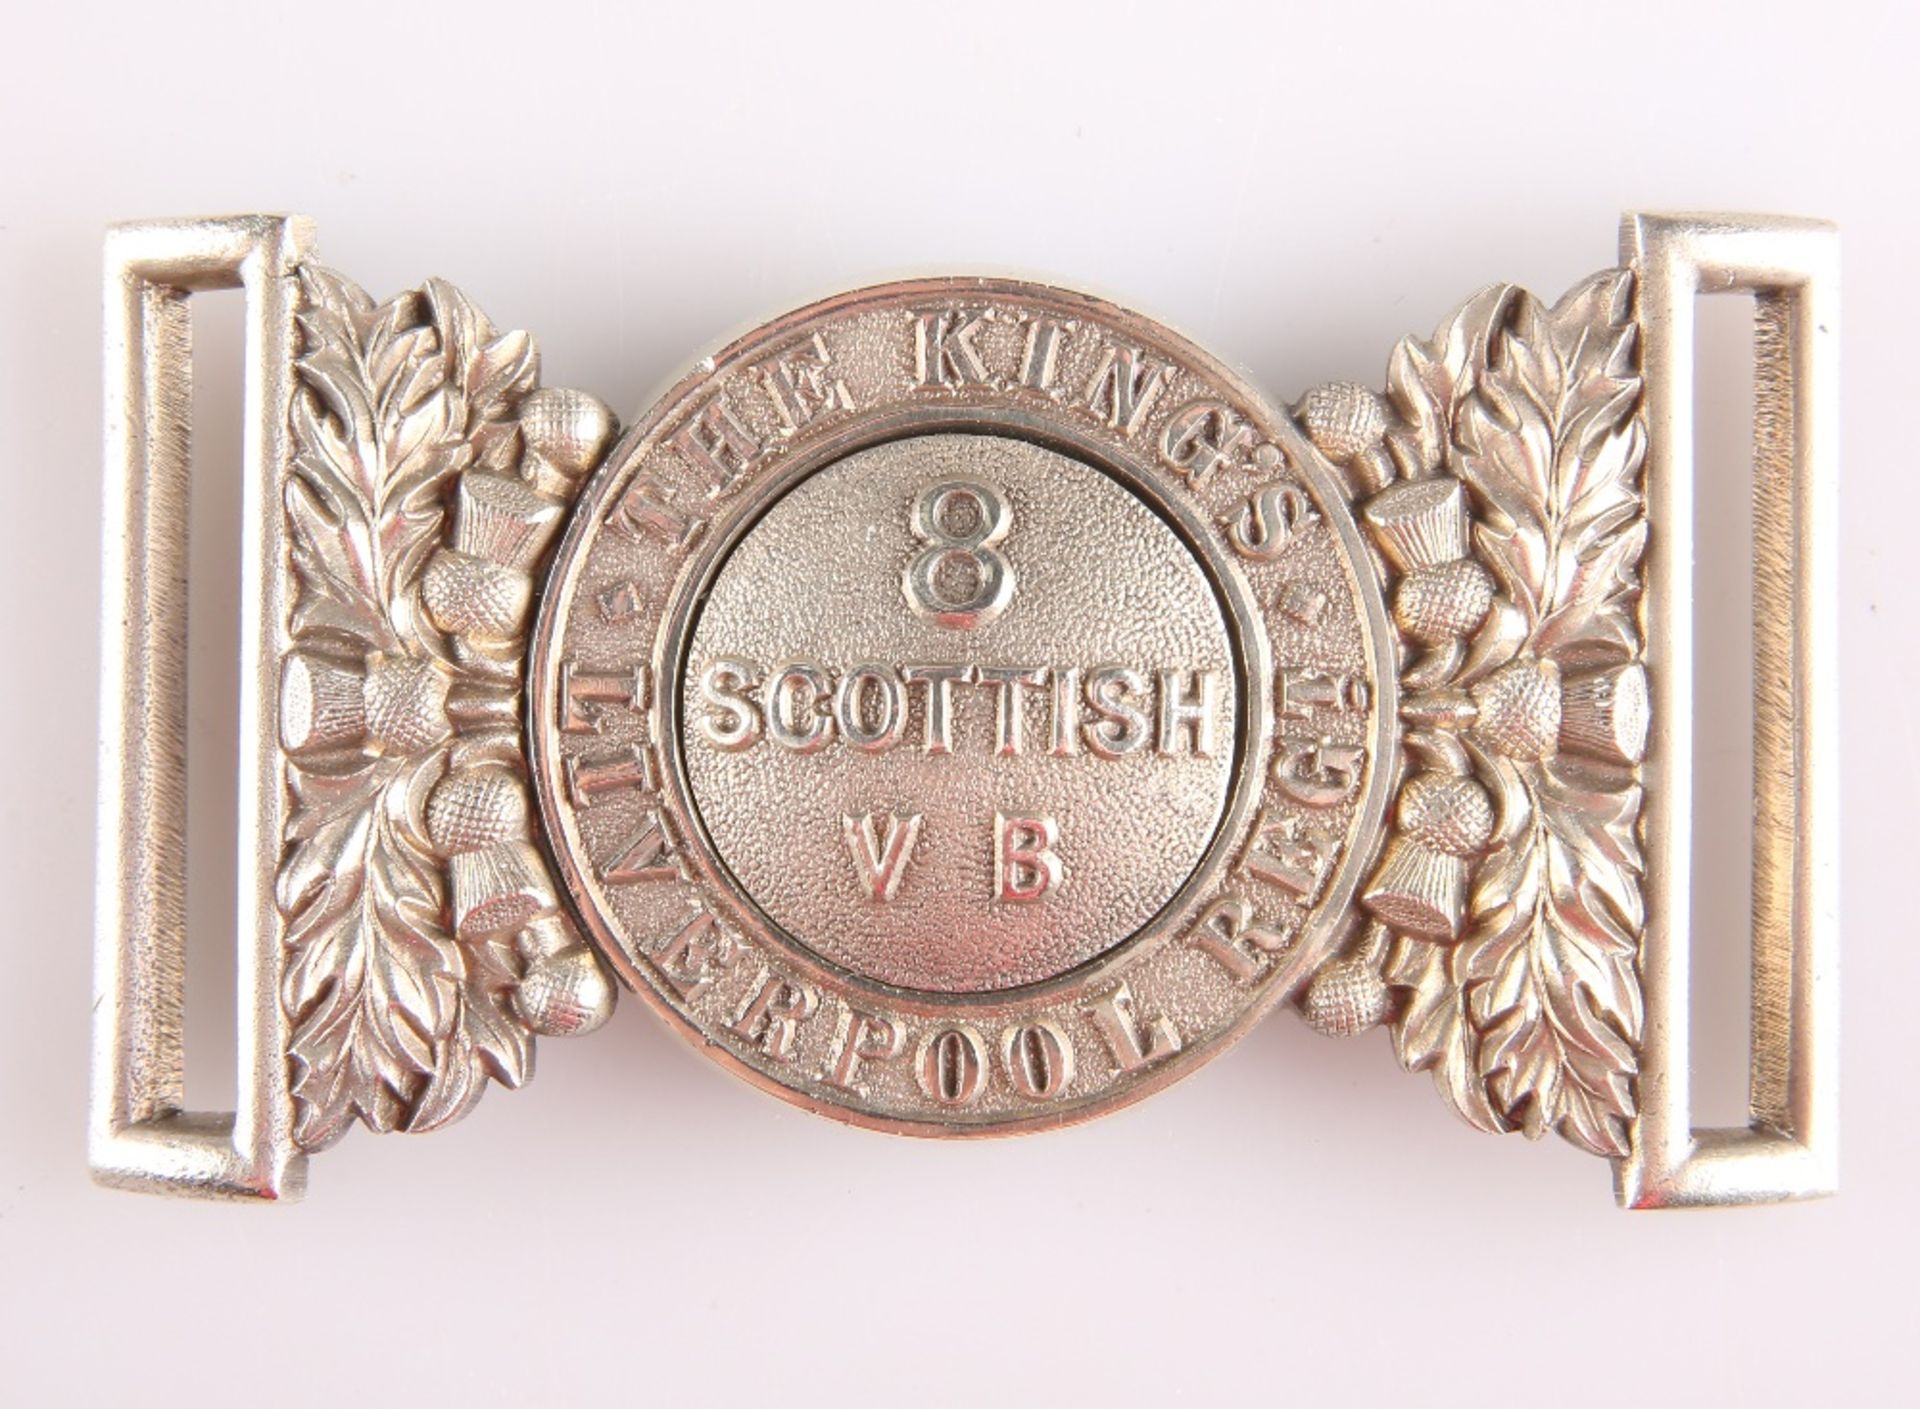 AN OFFICERS' PATTERN SILVER PLATE WAIST BELT CLASP OF THE 8TH (SCOTTISH) VOLUNTEER BATTALION